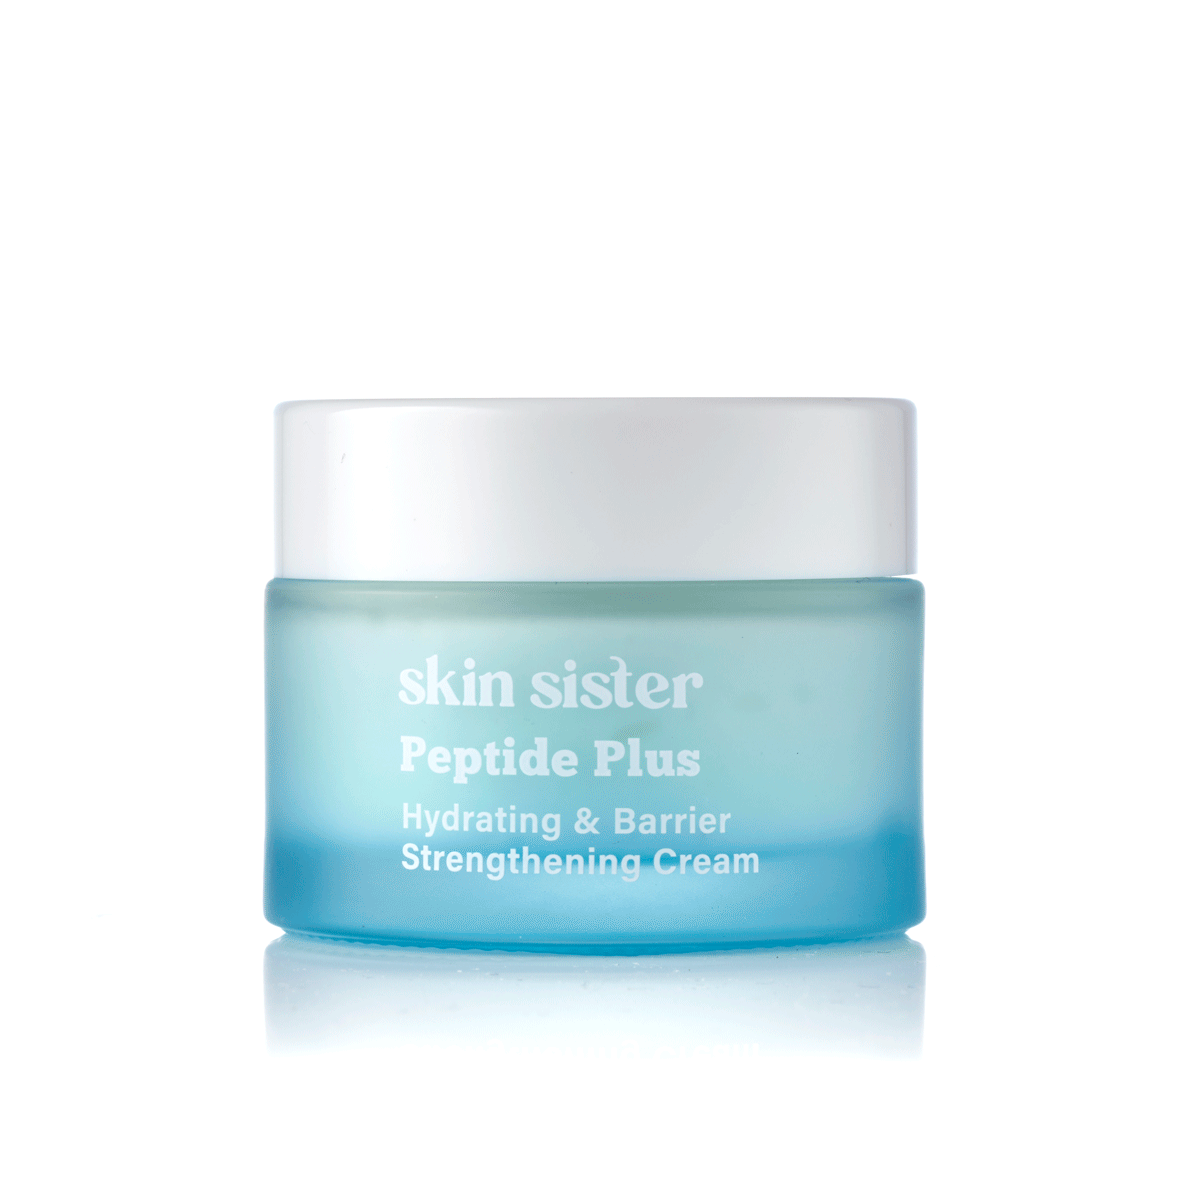 Hydrating and repairing skin cream moisturiser that strengthens your skin barrier. 360 Spinning image